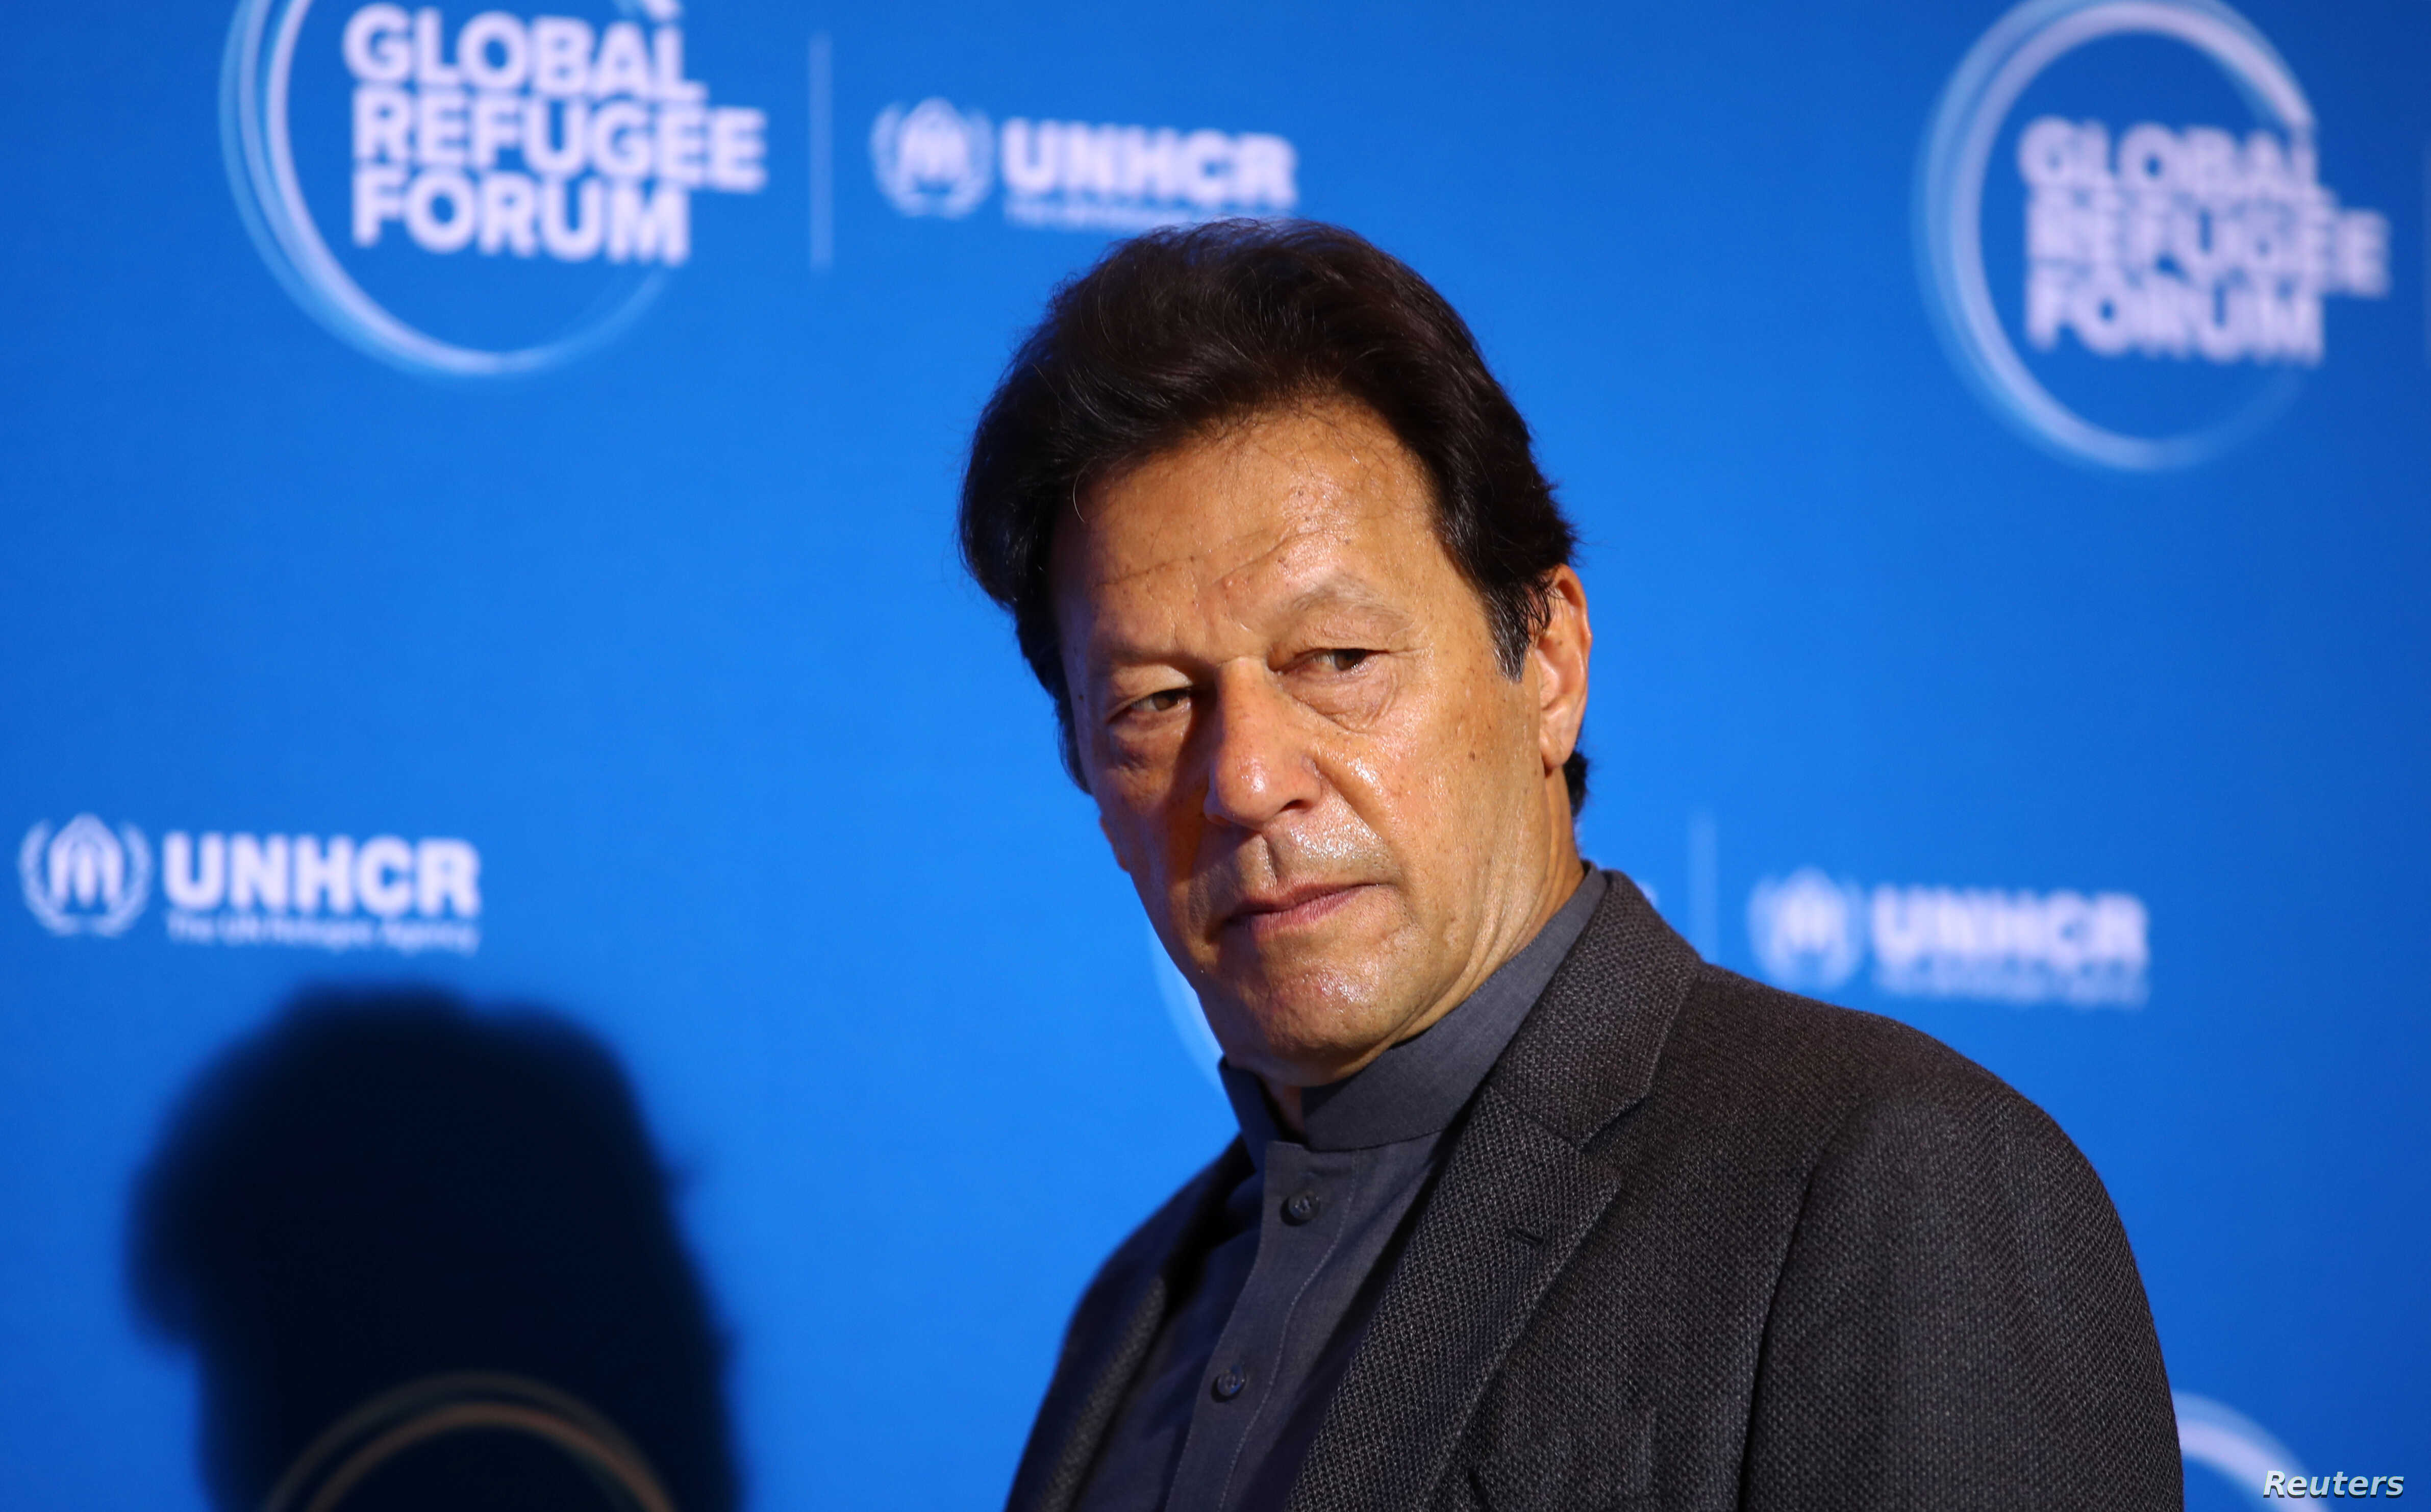 Pakistan's Prime Minister Imran Khan arrives for the Global Refugee Forum at the United Nations in Geneva, Switzerland, December 17, 2019, REUTERS/Denis Balibouse - RC2VWD9XYJC0